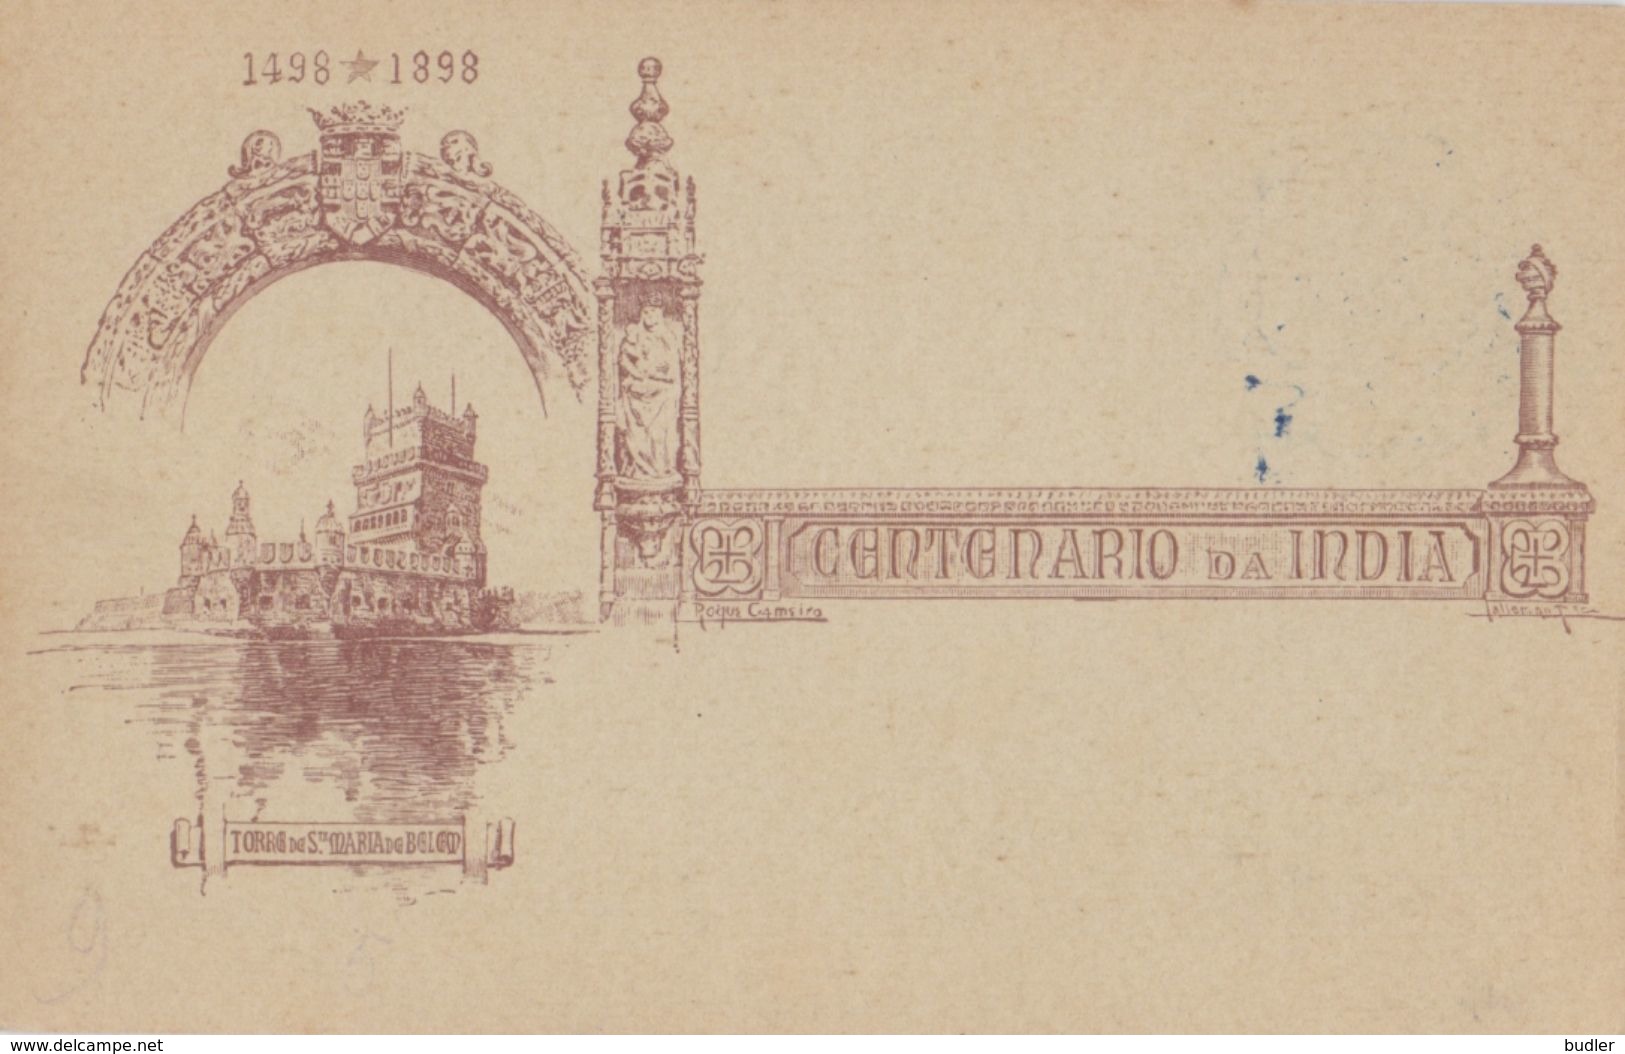 PORTUGAL :1898: ## UNION POSTALE UNIVERSELLE ** AFRICA – Carte Postale ## Postal Stationery – New : ARCHITECTURE,HISTORY - Africa Portuguesa